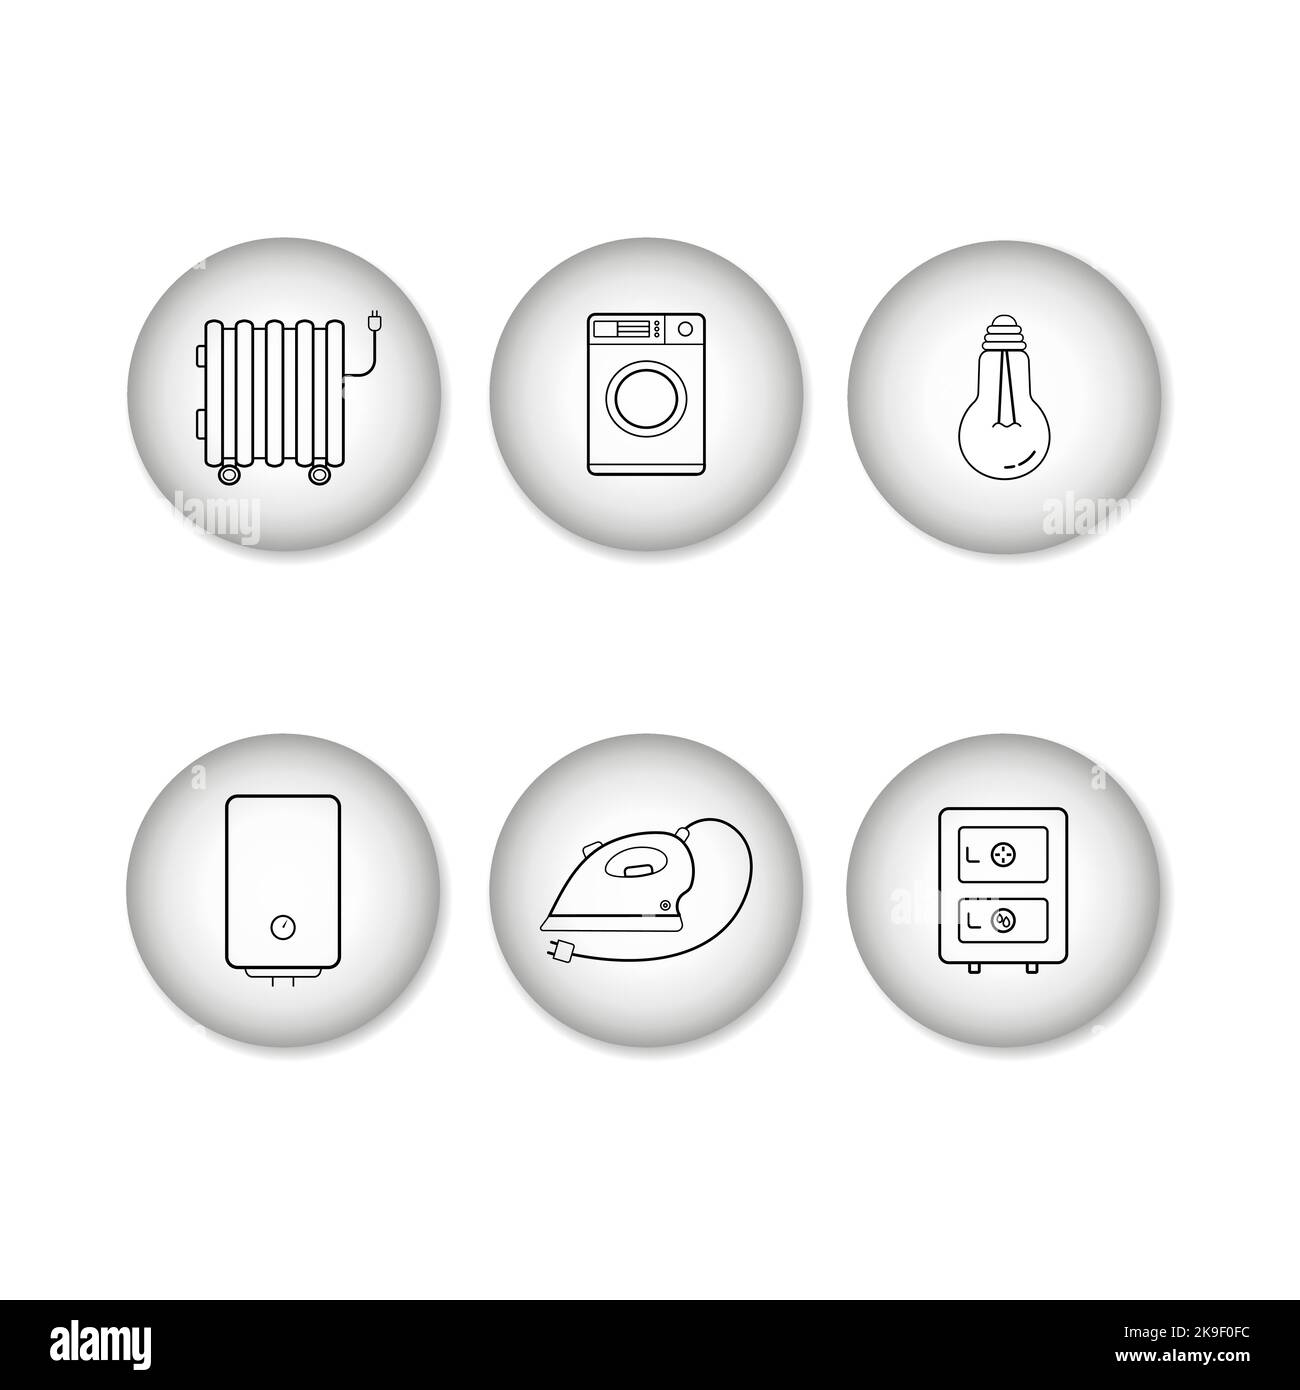 Linear icons of electrical appliances on round backgrounds with 3D effect. Vector icons isolated on white. Stock Vector